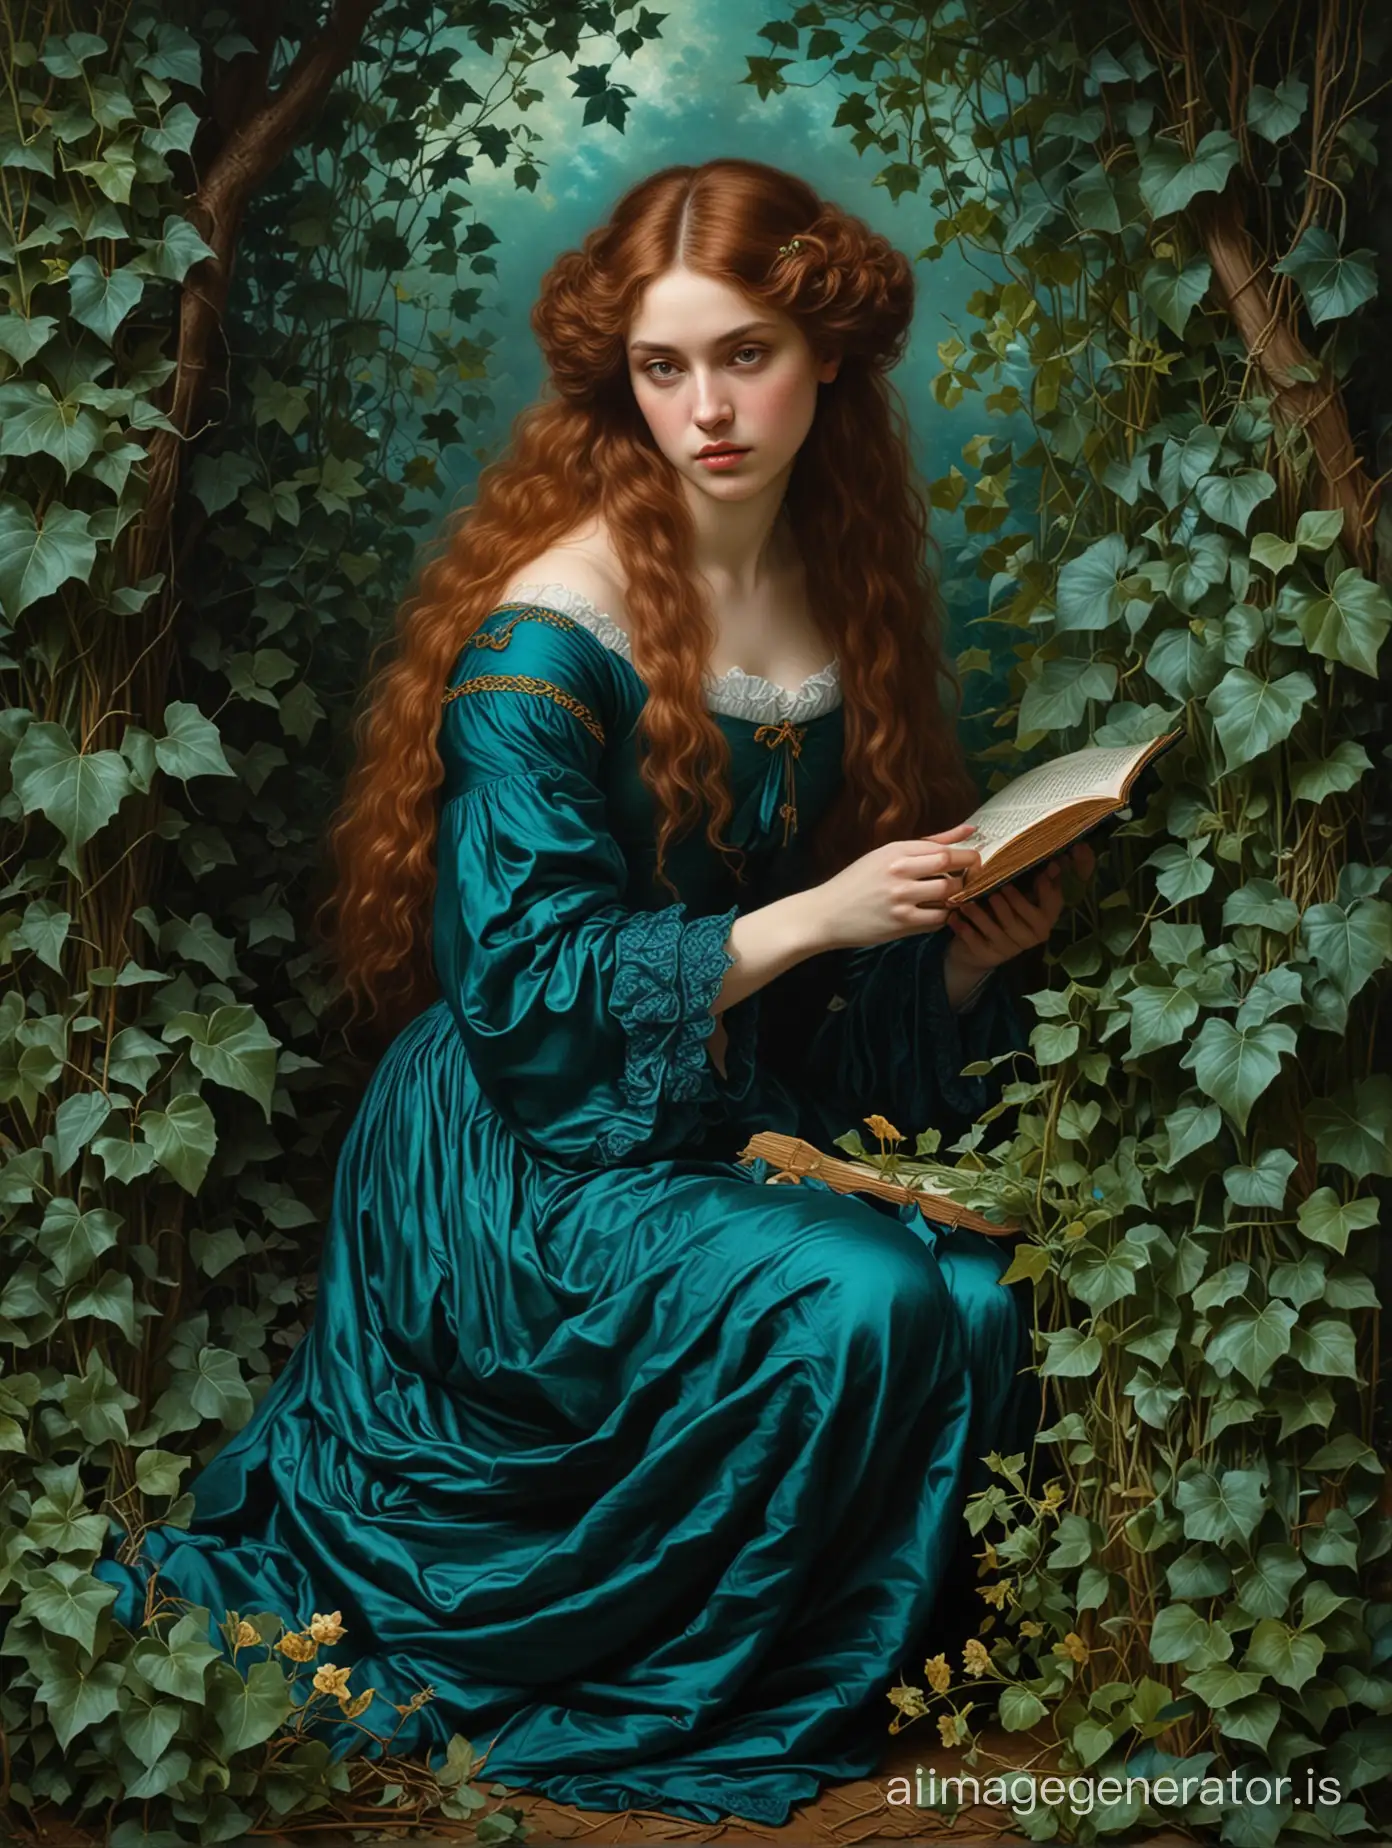 Enigmatic-Beauty-PreRaphaelite-Painting-of-a-Young-Woman-Amidst-Ivy